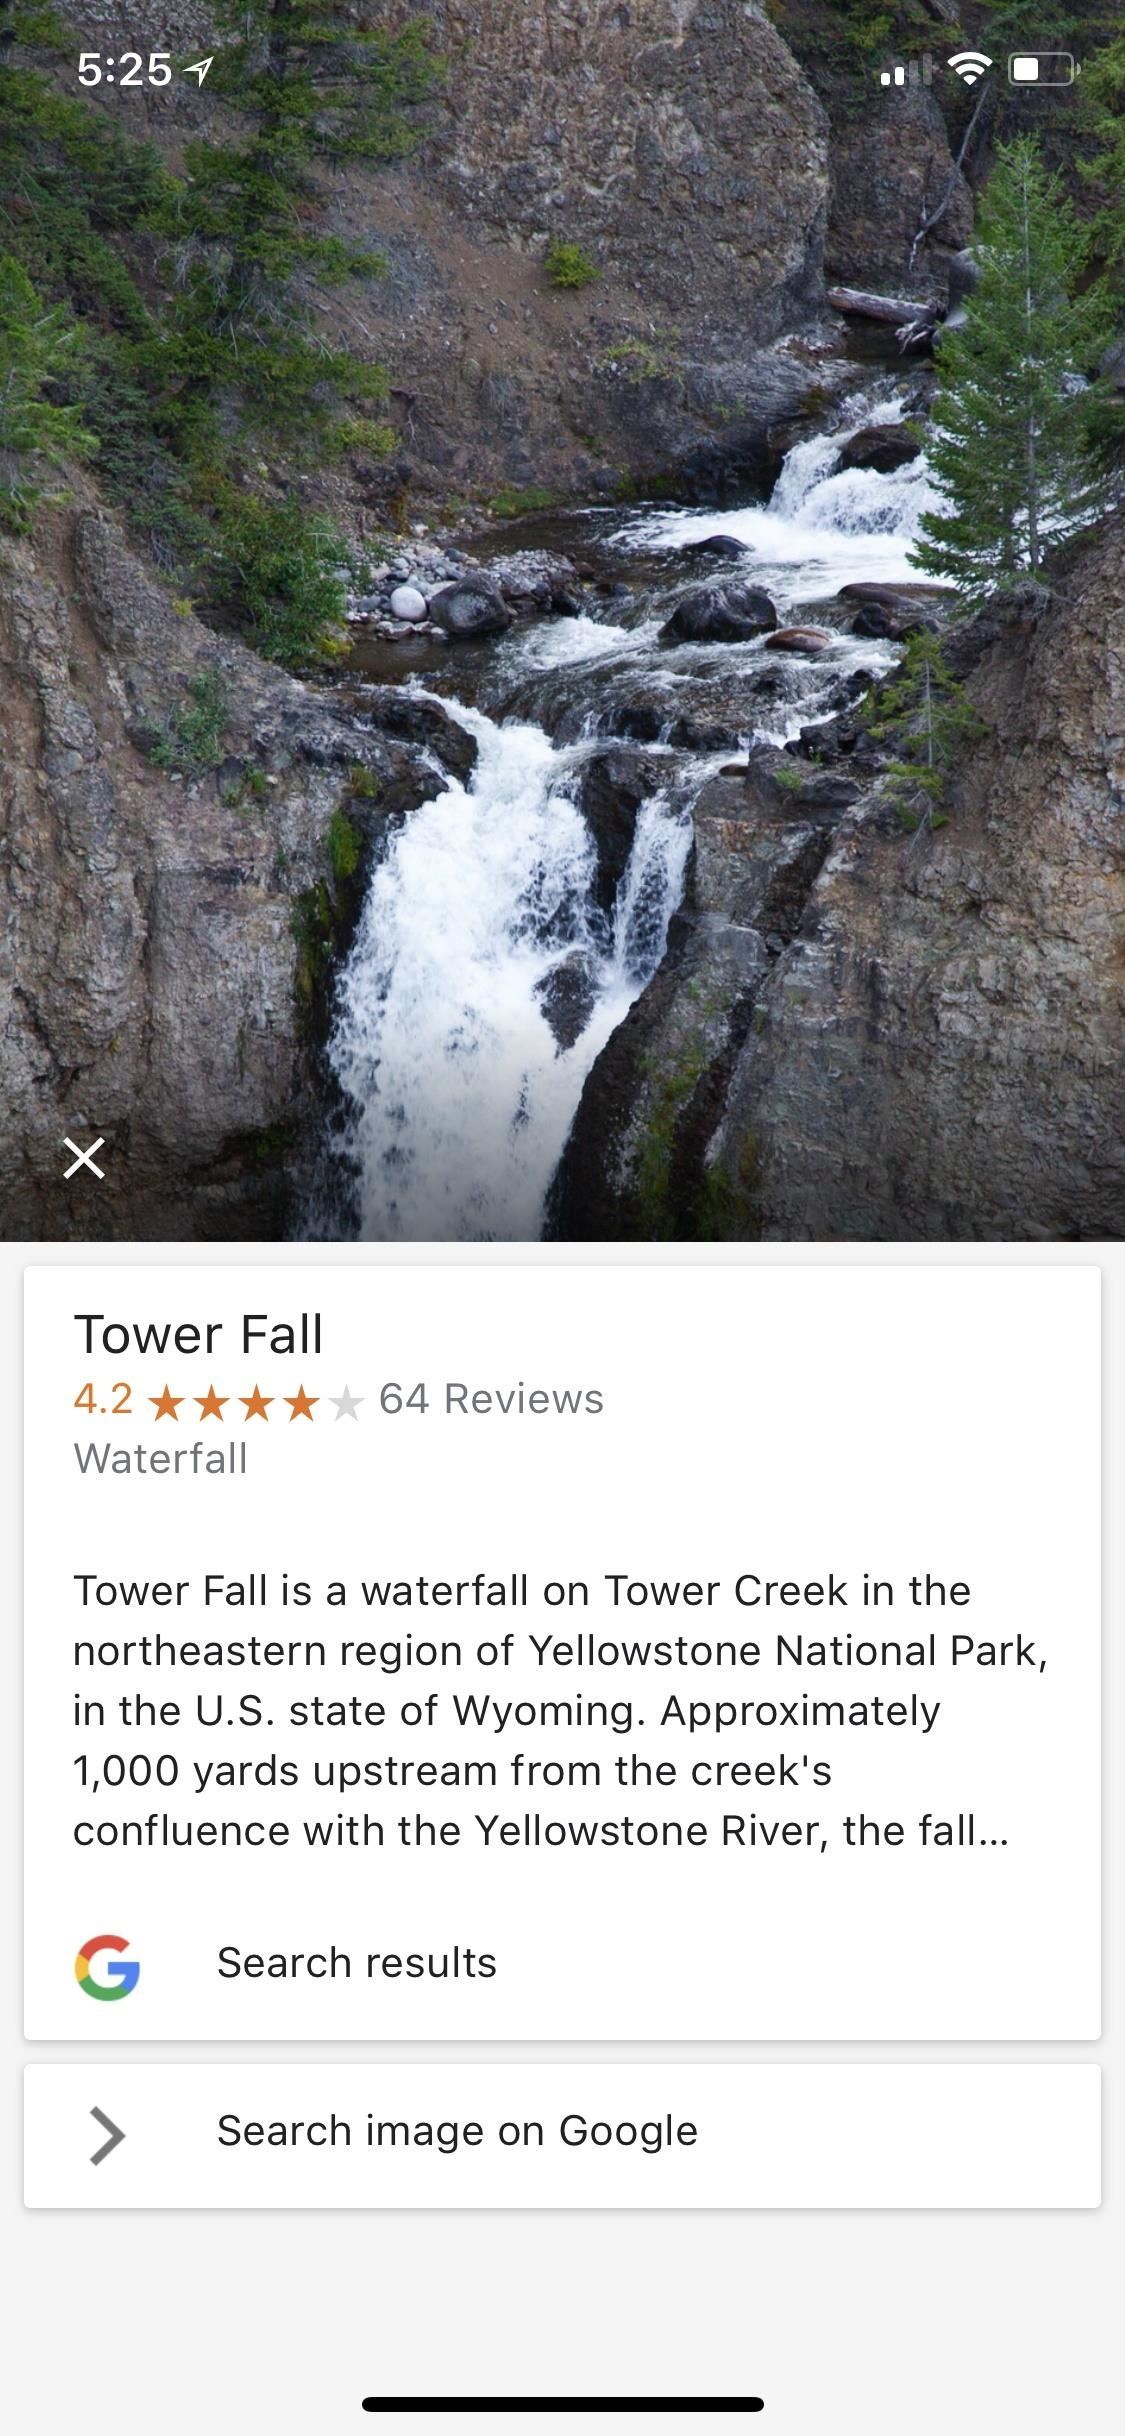 Google Photos 101: How to Use Google Lens to Identify Landmarks in Your Images